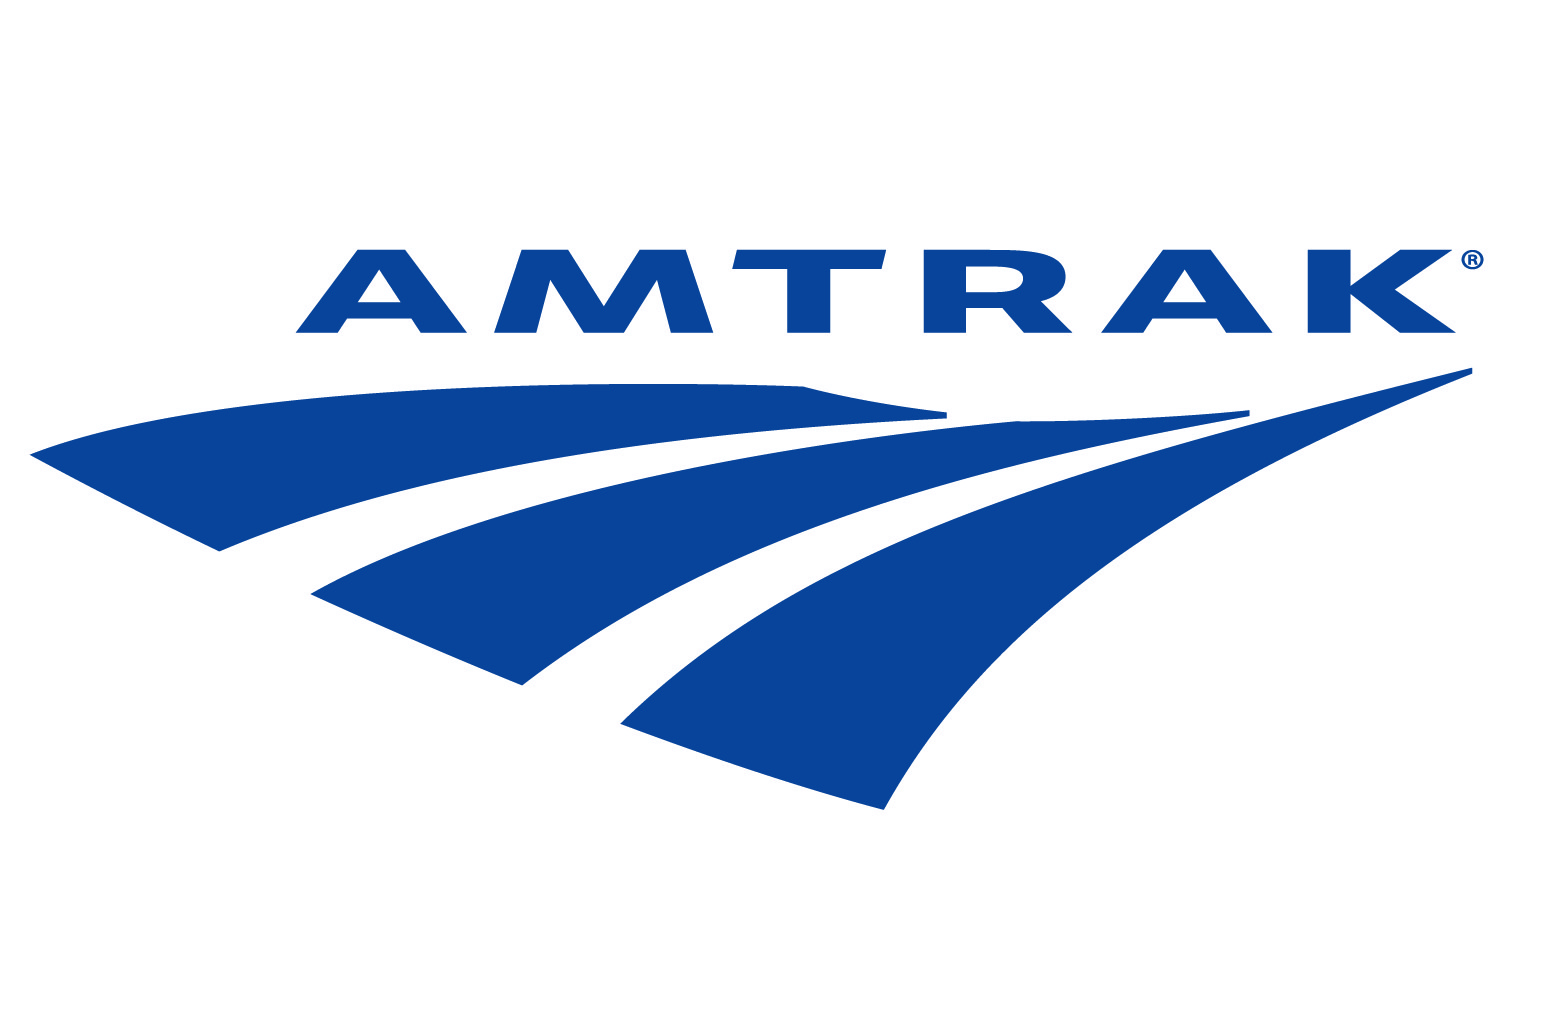 Oklahoma official says rail used by Amtrak is compliant